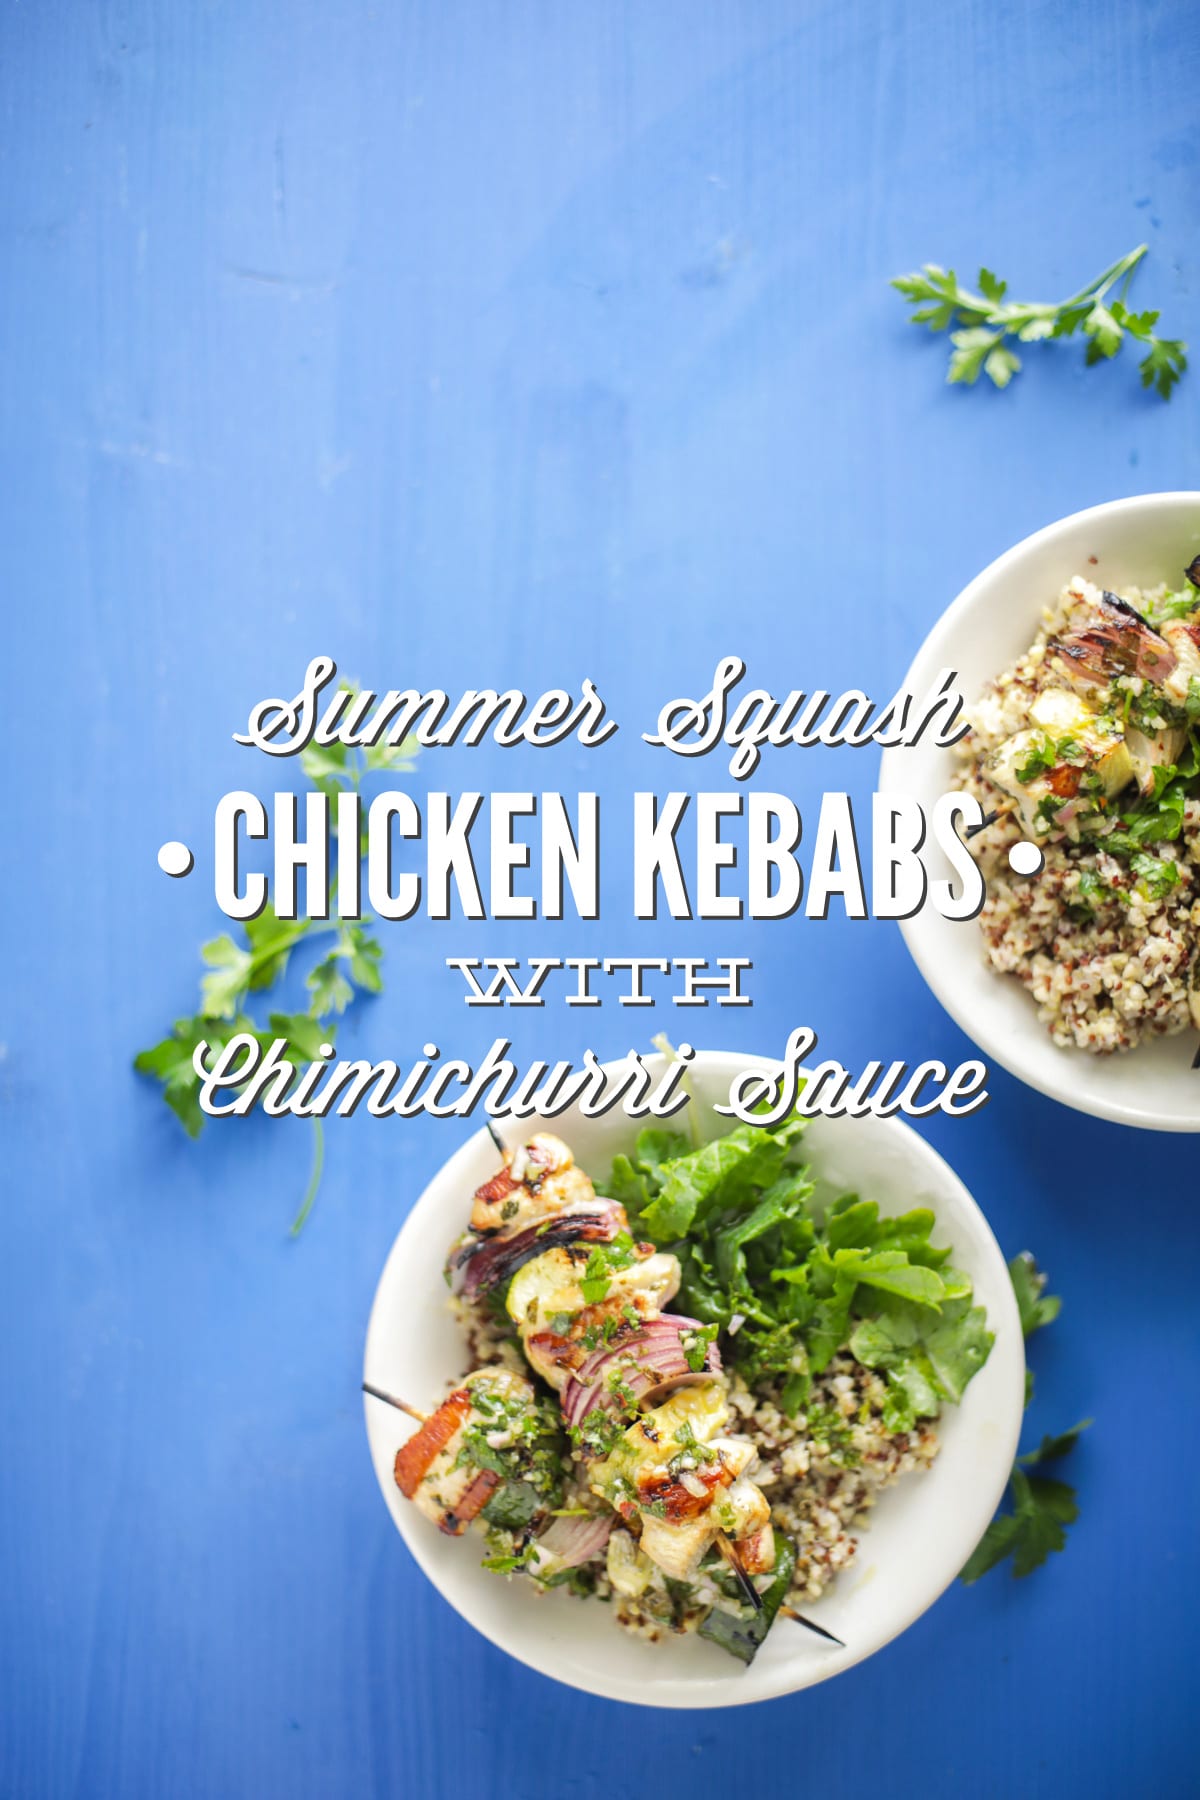 Summer Squash Chicken Kebabs with Chimichurri Sauce